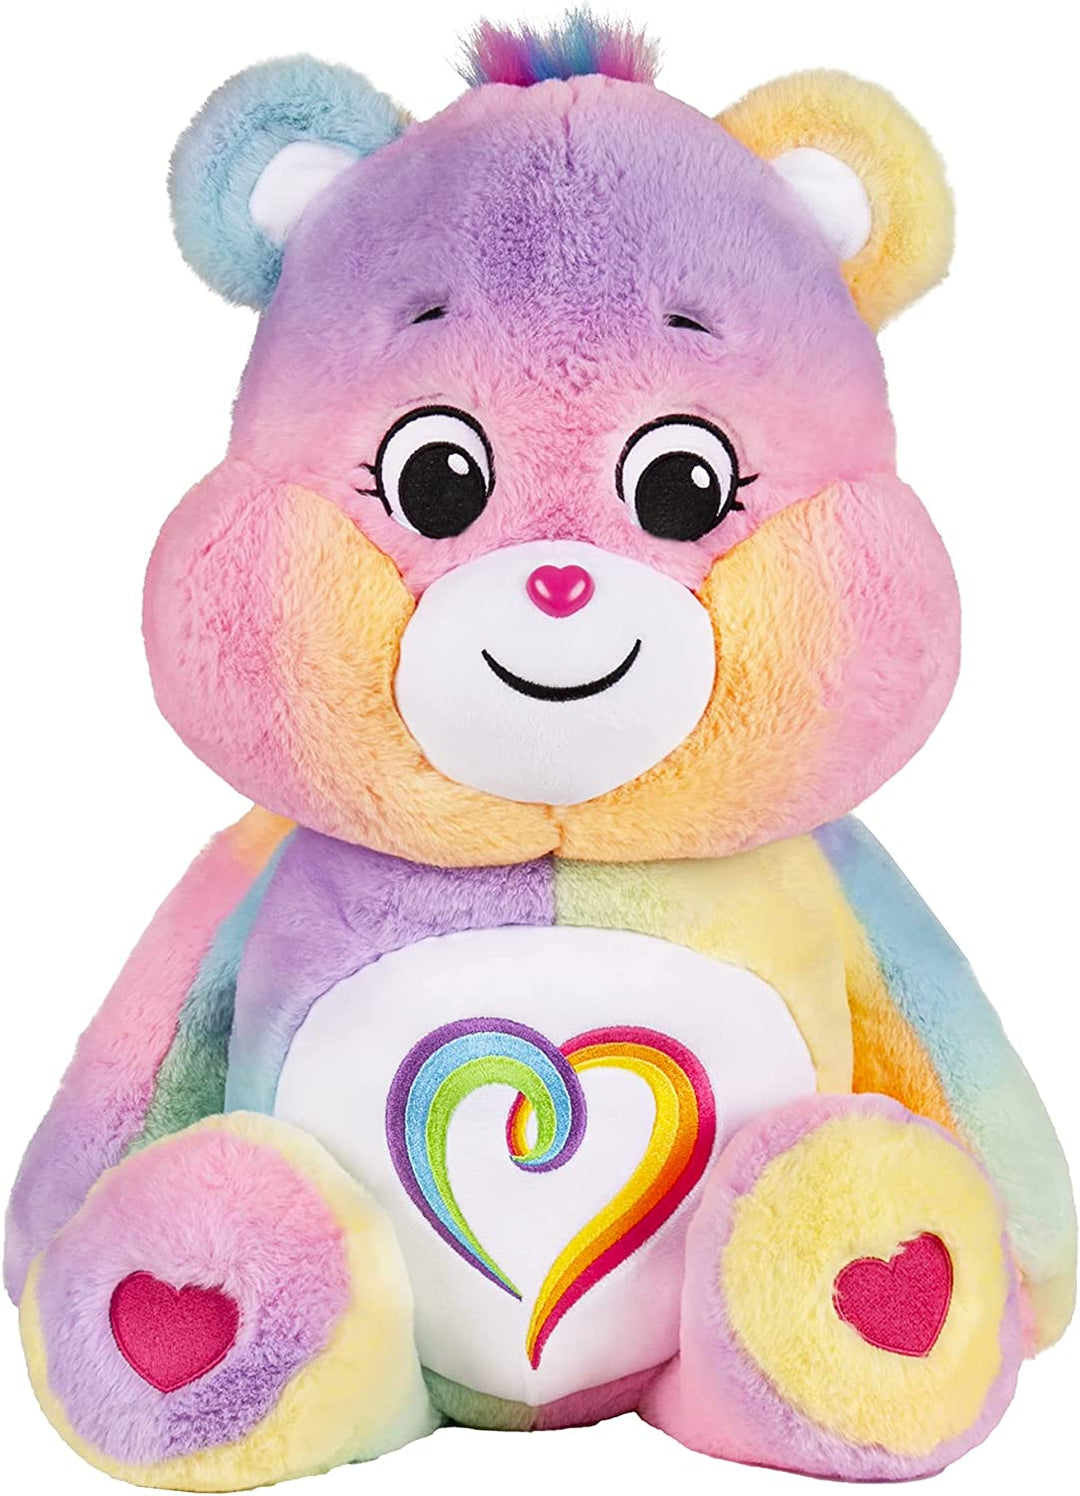 Care Bears 22067 24 Inch Jumbo Plush Togetherness Bear, Collectable Cute Plush T